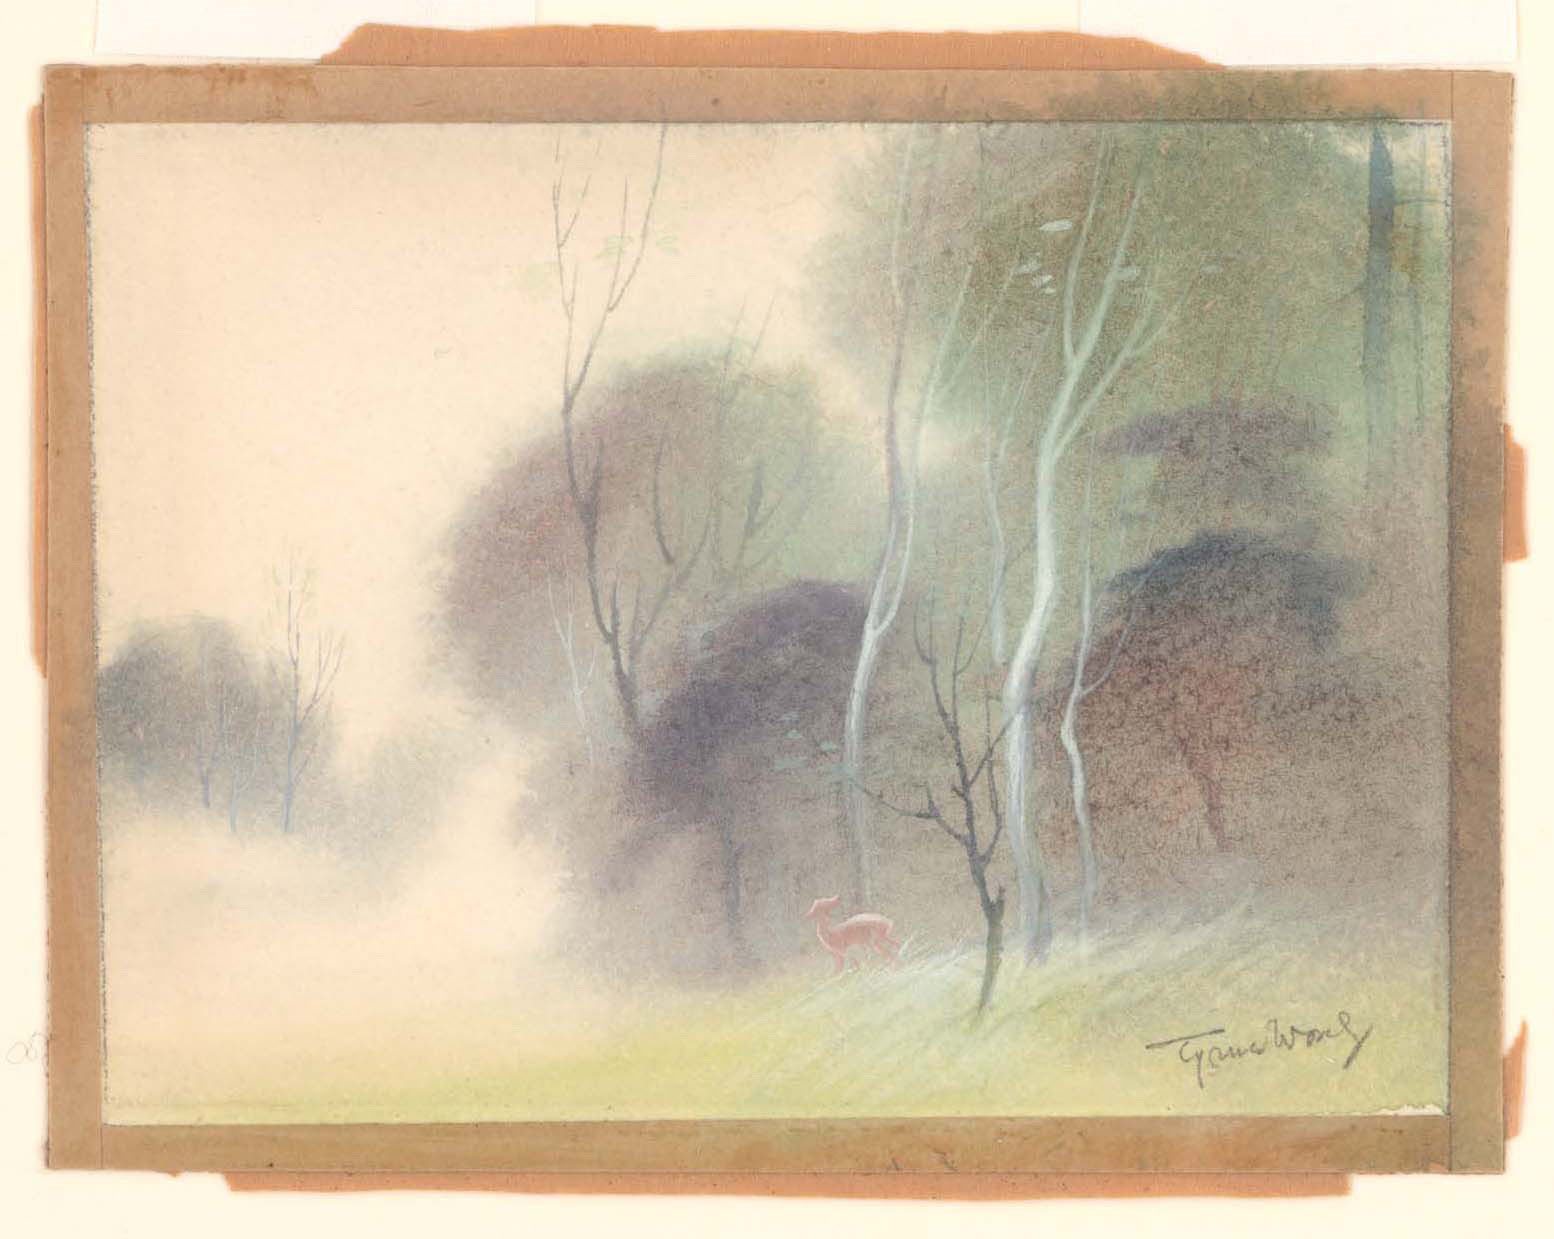 "Bambi" concepts by Tyrus Wong.